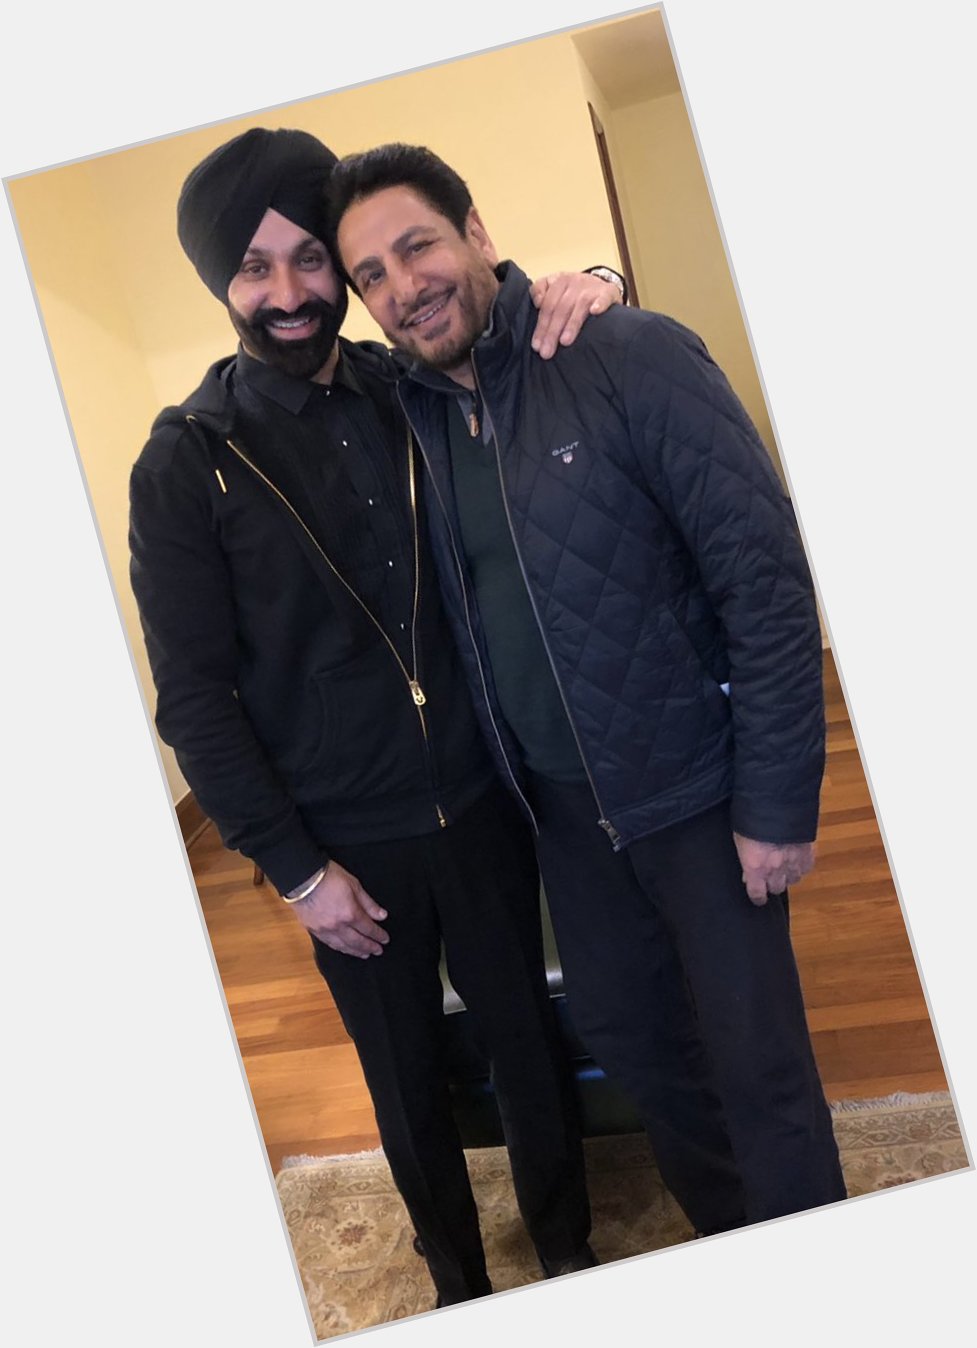 Happy birthday to the one and only living legend gurdas maan ji 